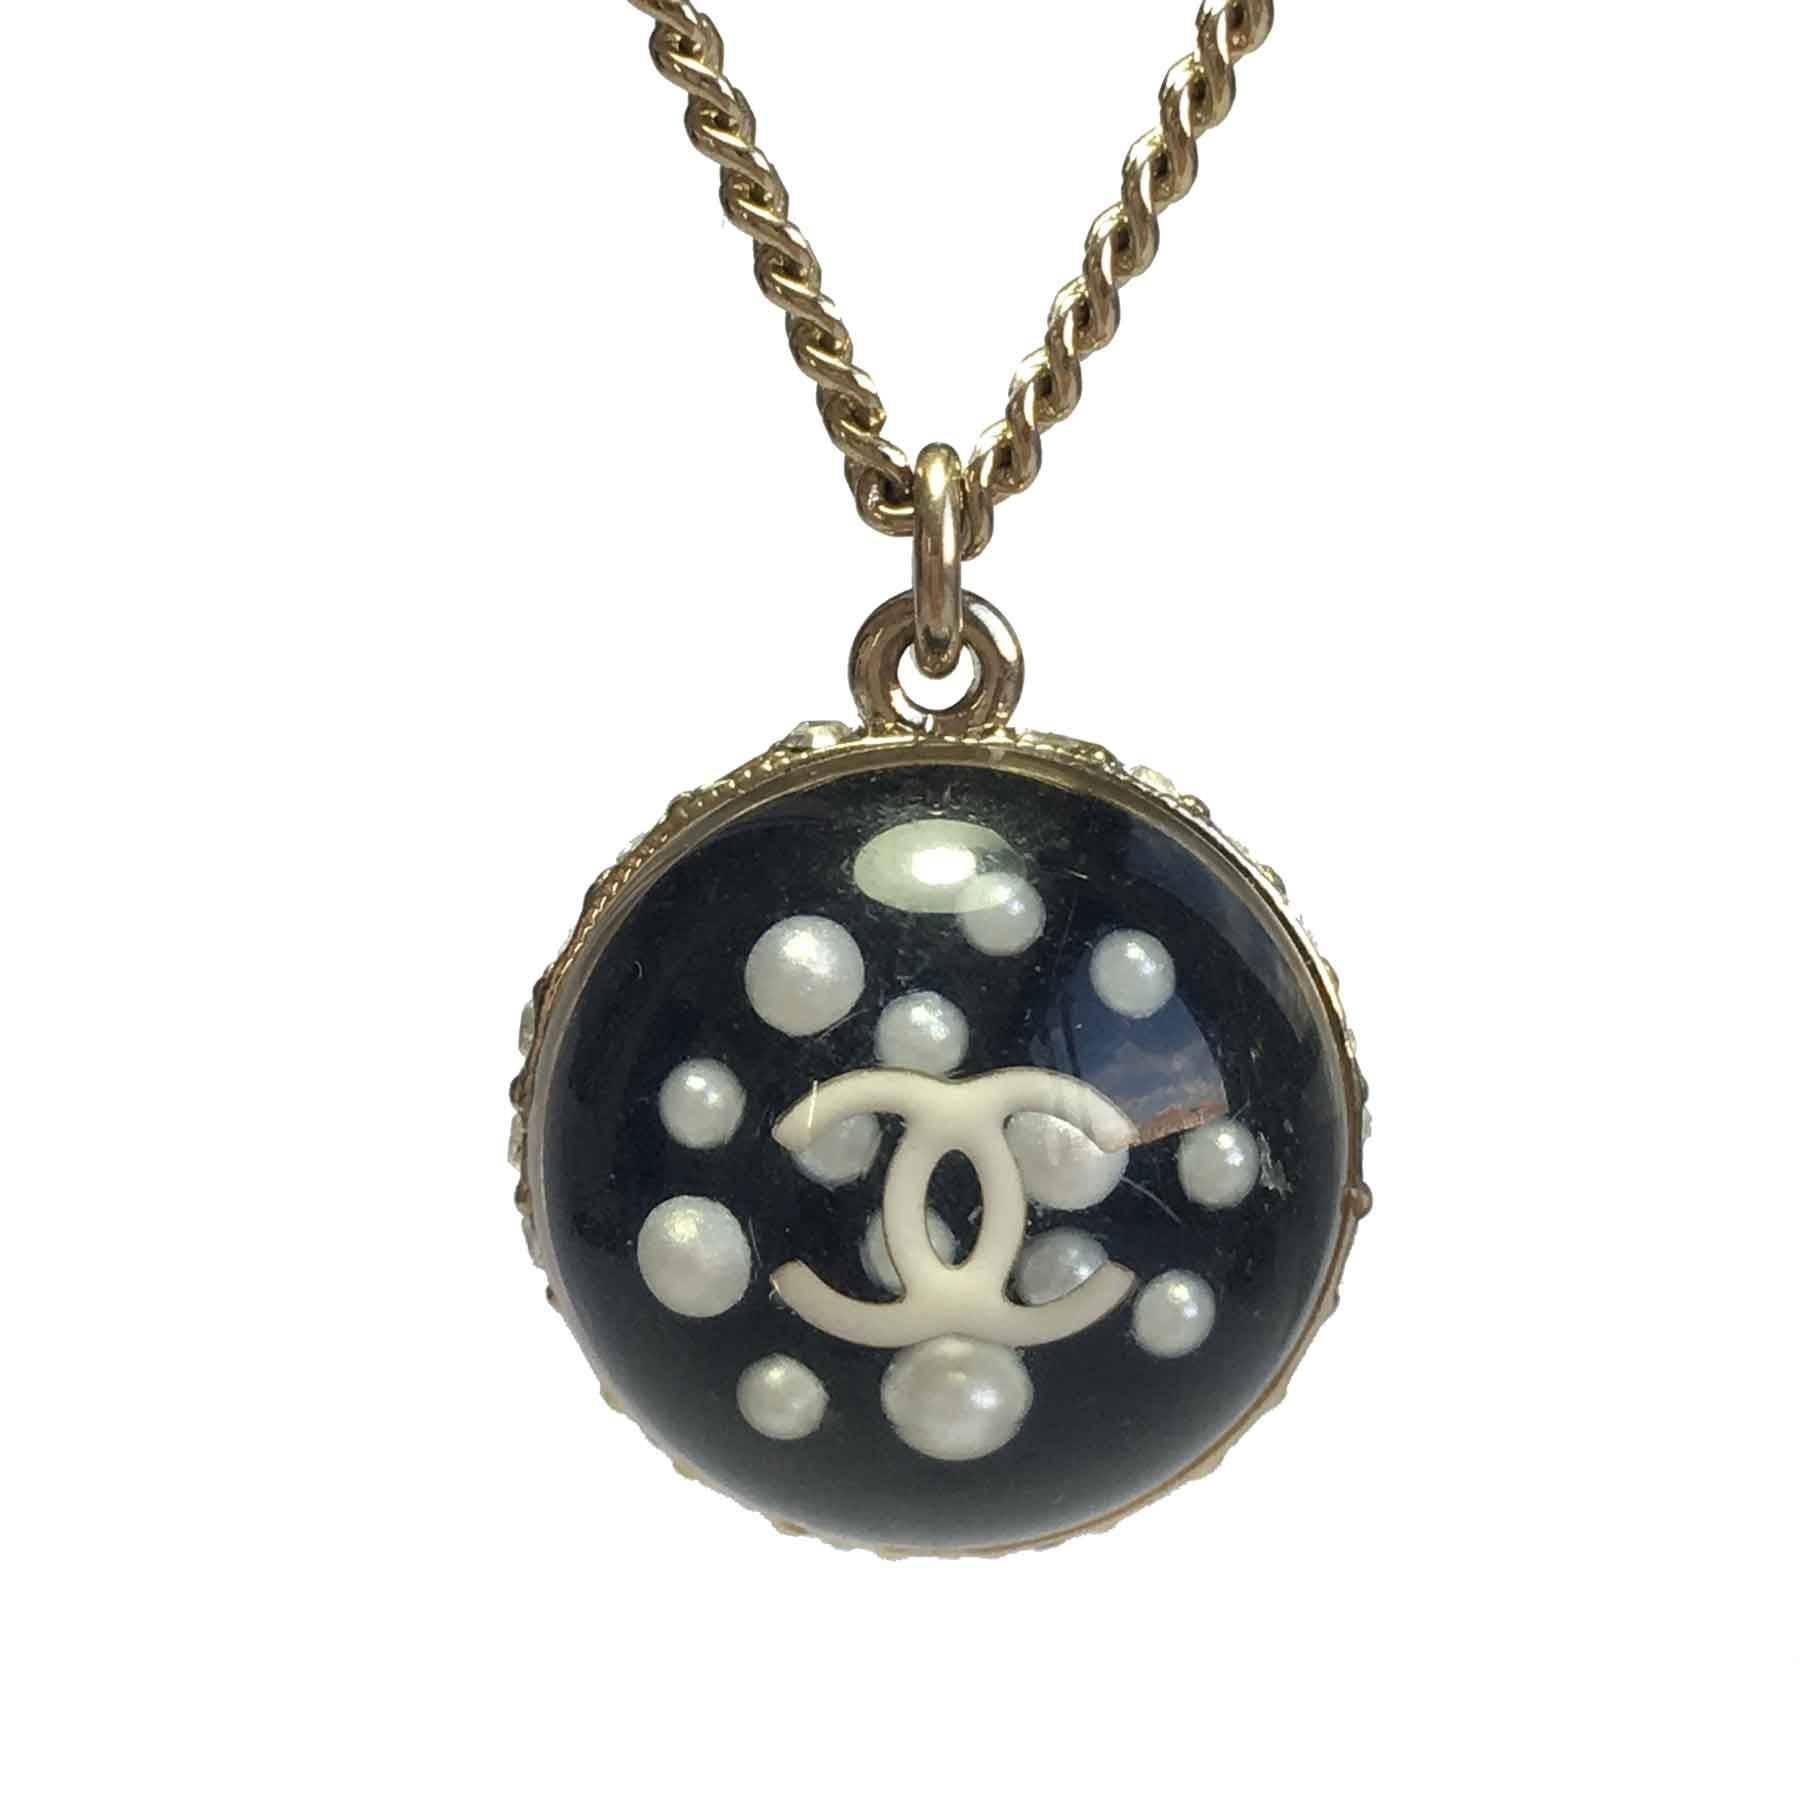 Women's CHANEL Necklace in Gilded Metal and Ball Pendant with Inclusion of CC and Pearls